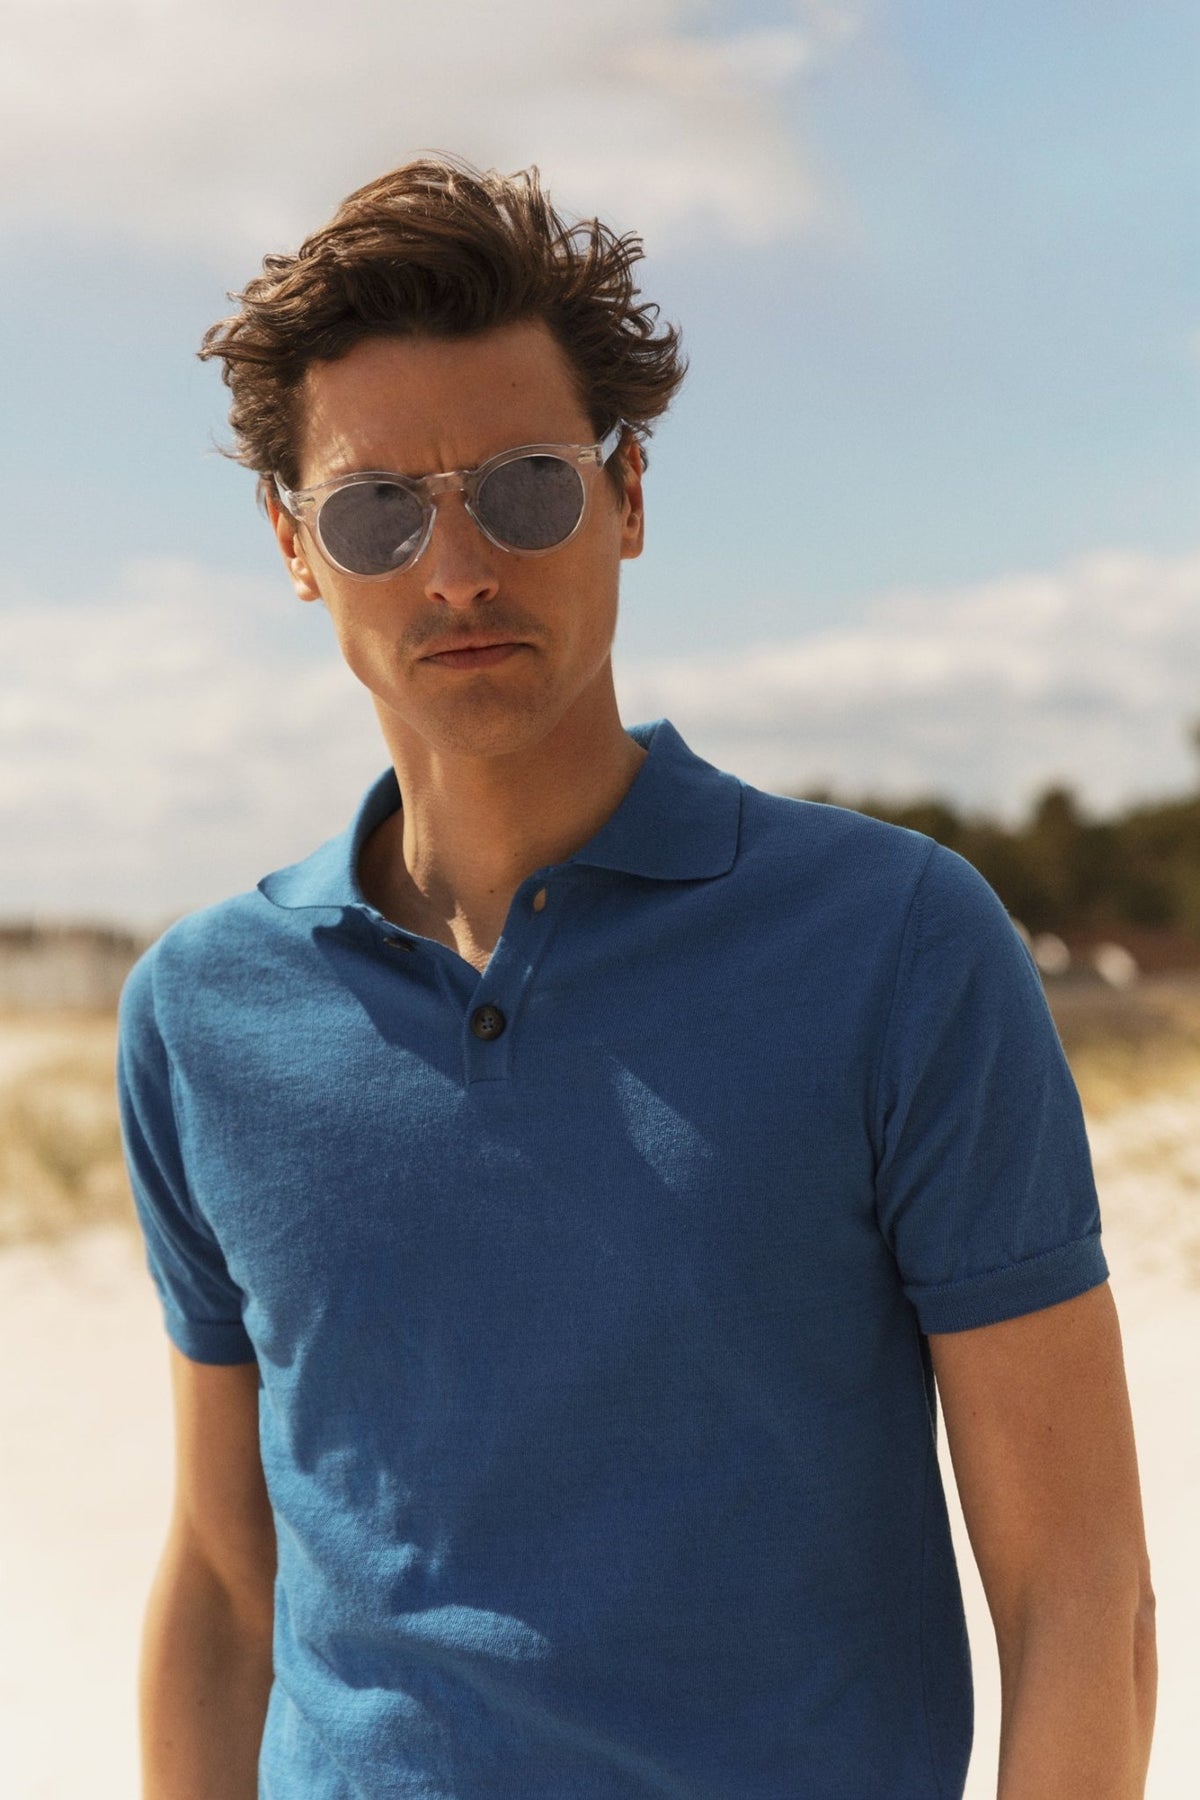 Man Wearing The Resort Co Blue Polo and Sunglasses